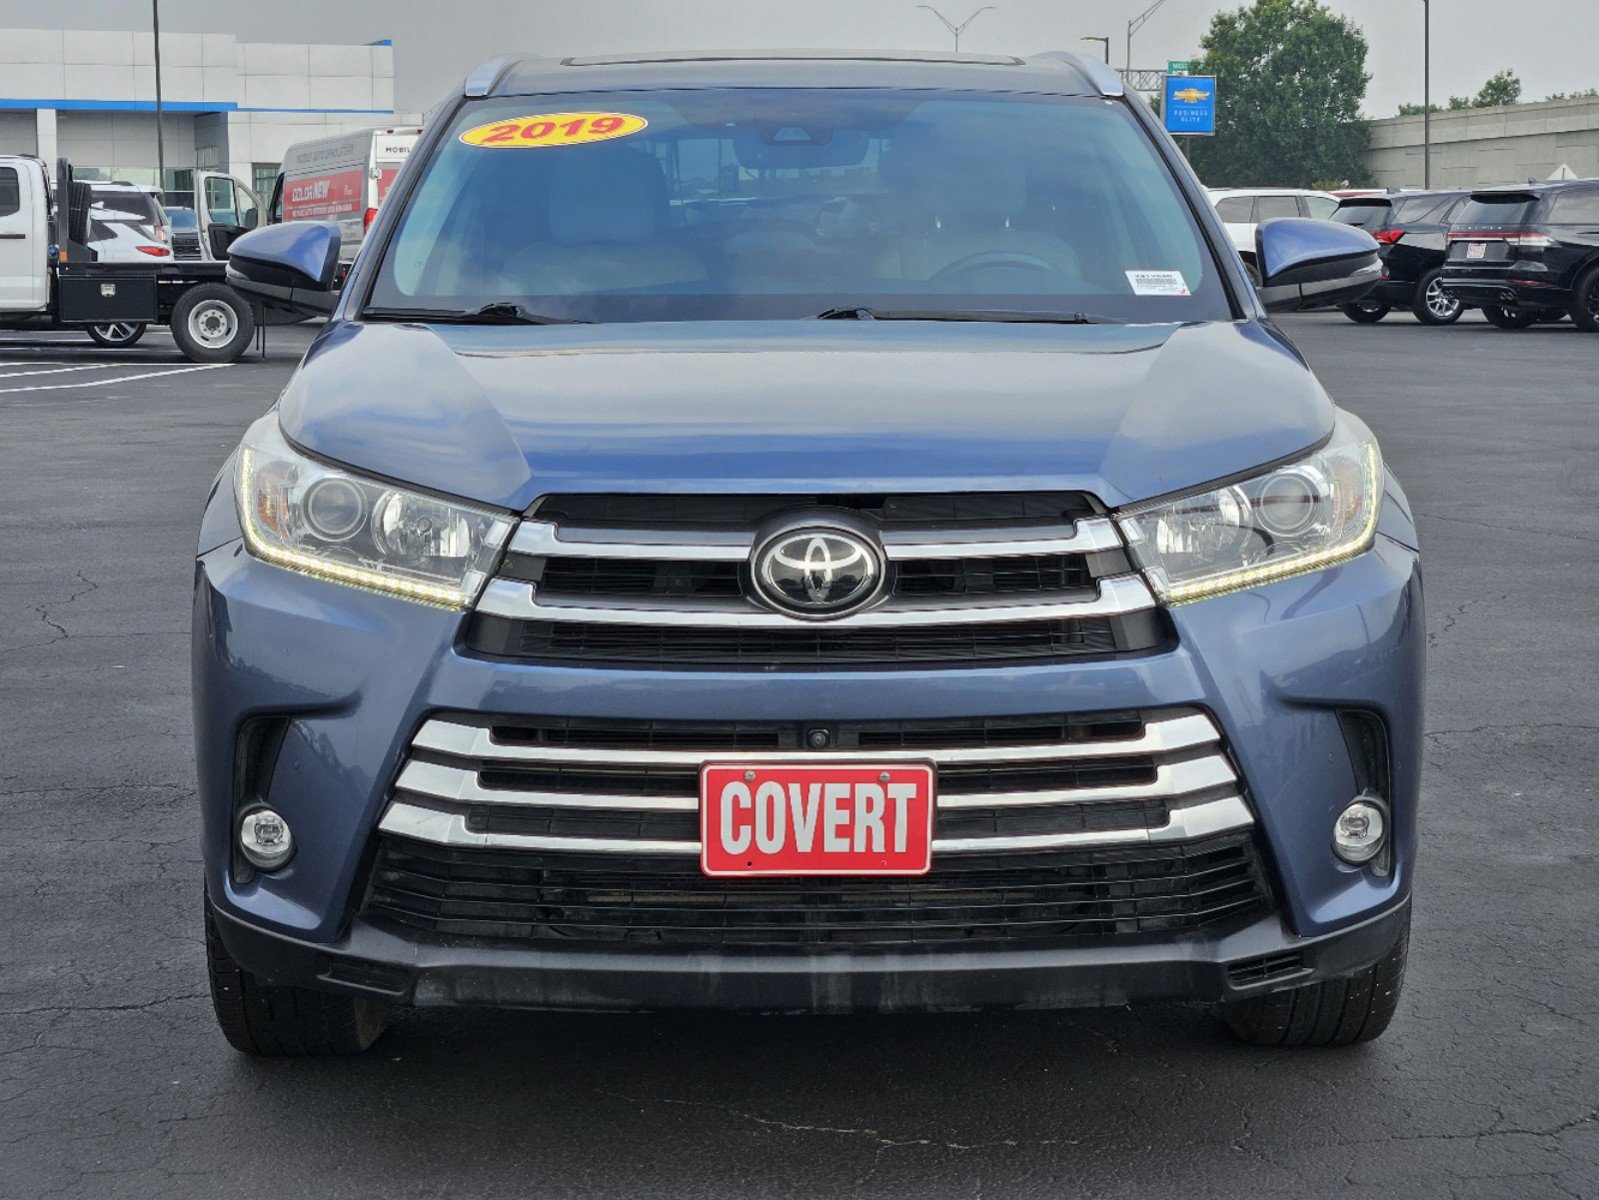 Used 2019 Toyota Highlander Limited with VIN 5TDYZRFH0KS337133 for sale in Bastrop, TX